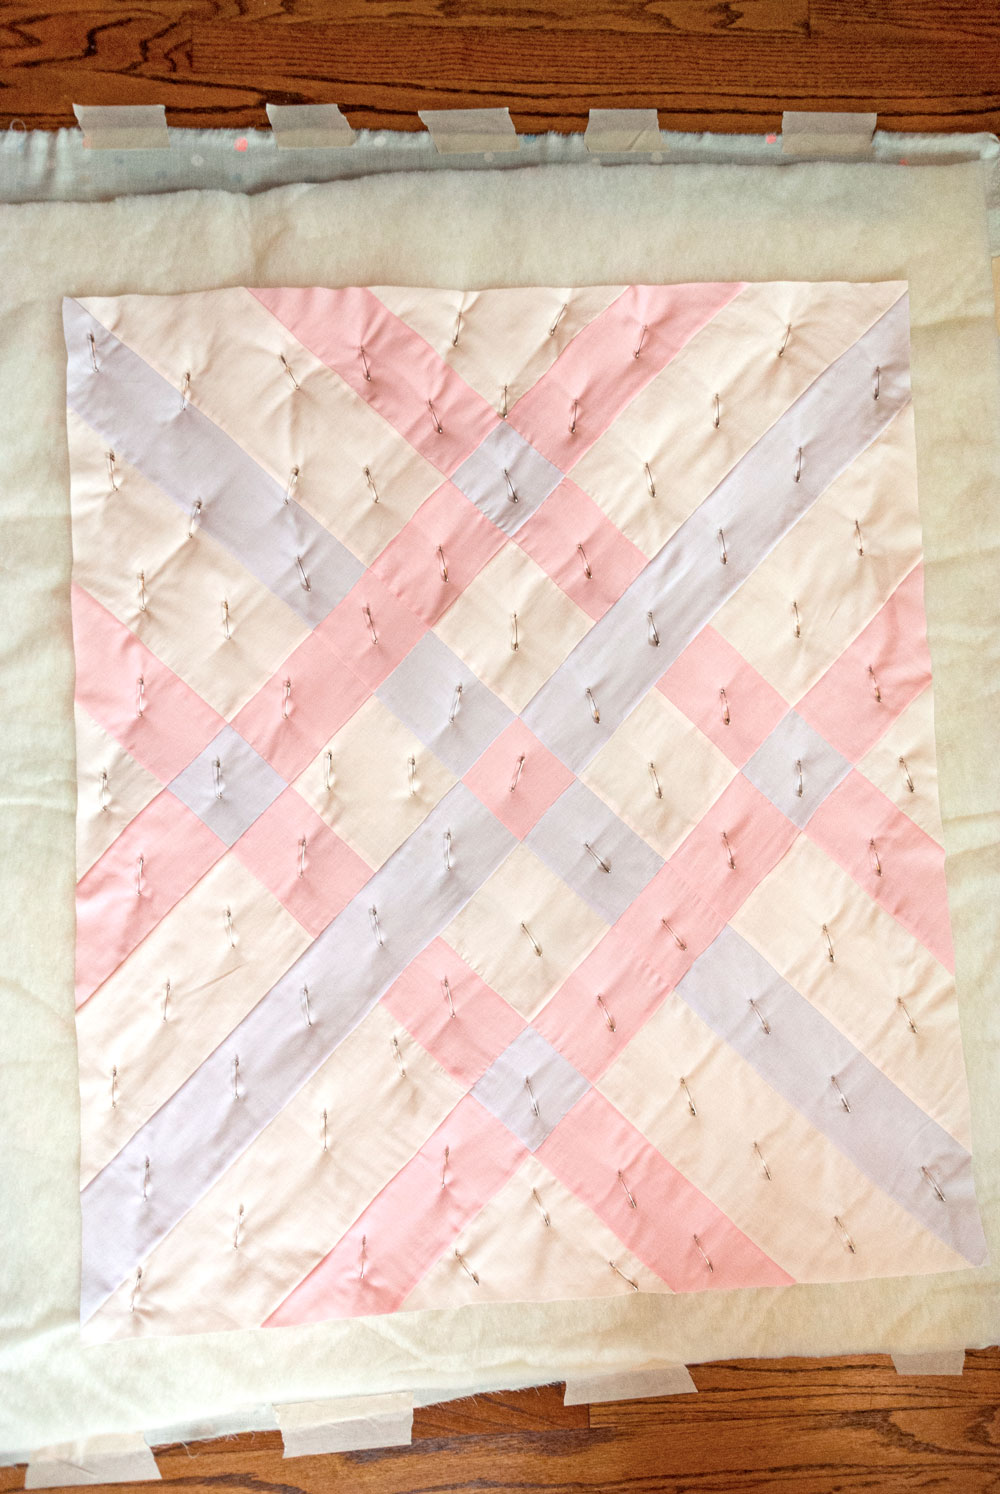 How to make the softest baby quilt in the world! The answer is to quilt with double gauze and wool batting – a sewing tutorial on how to do both! suzyquilts.com #babyquiltpattern #nurseryinspo